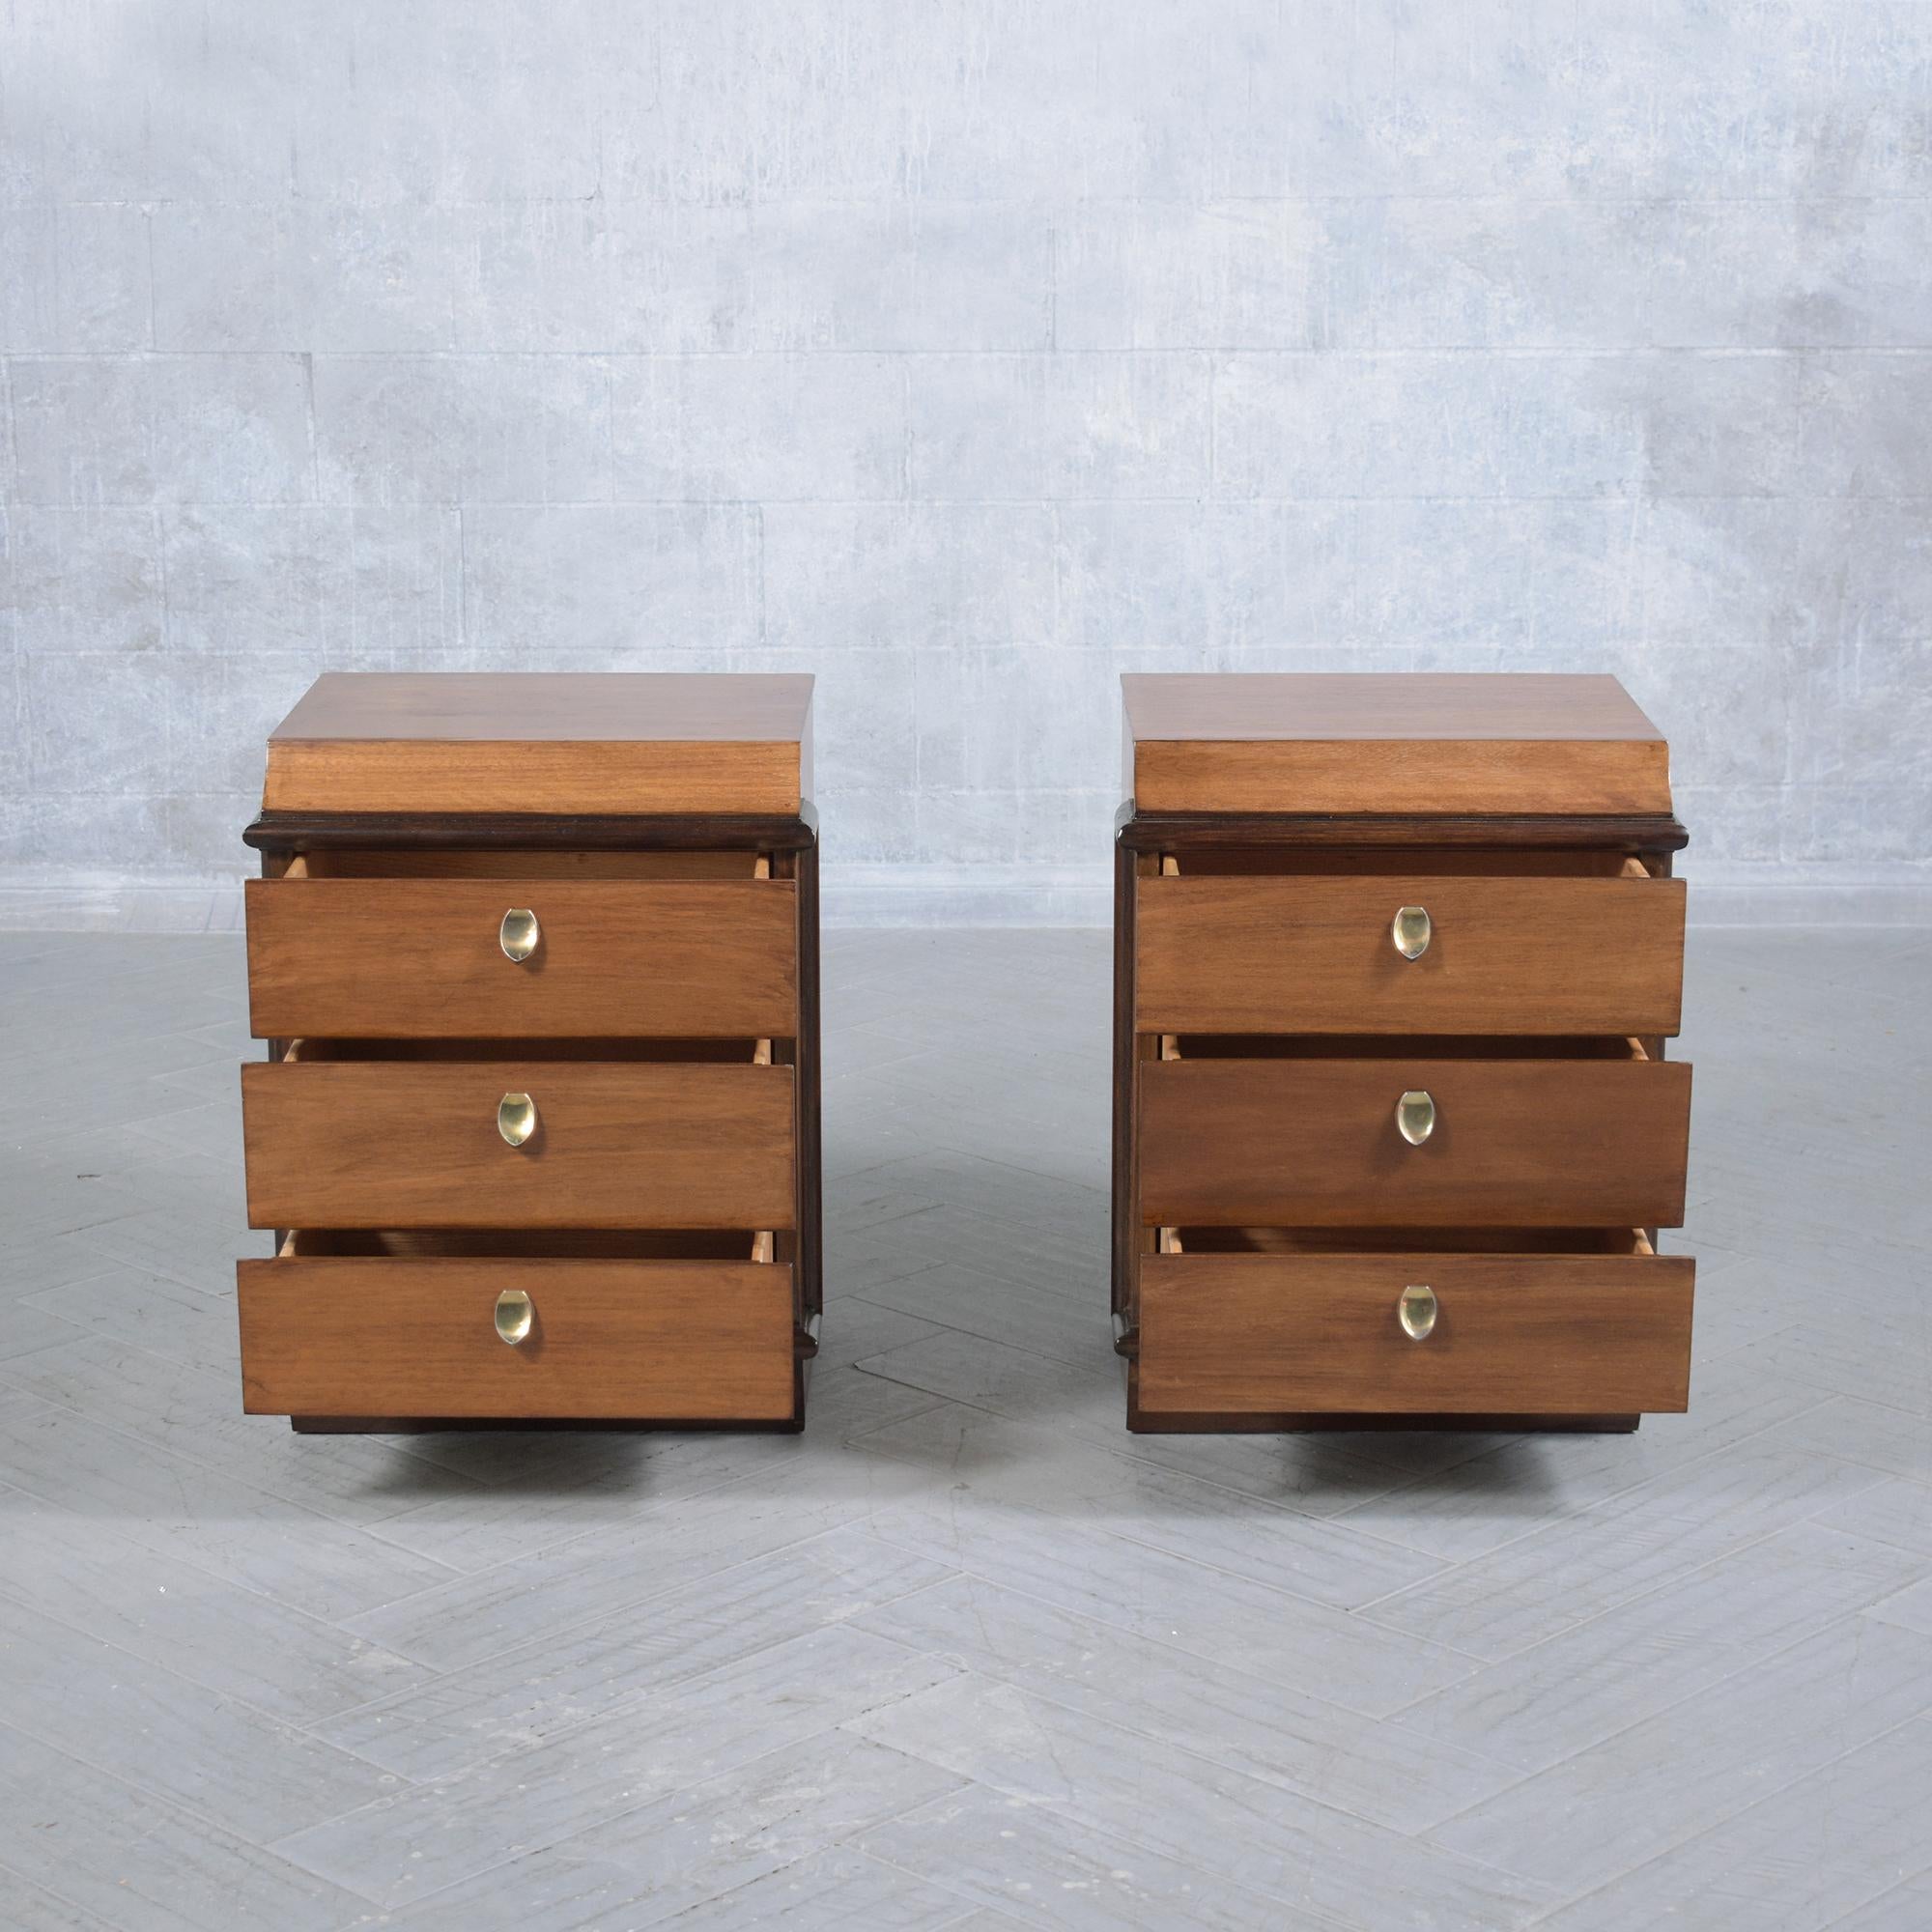 Patinated 1960s Mid-Century Modern Walnut Nightstands - A Timeless Pair Restored For Sale